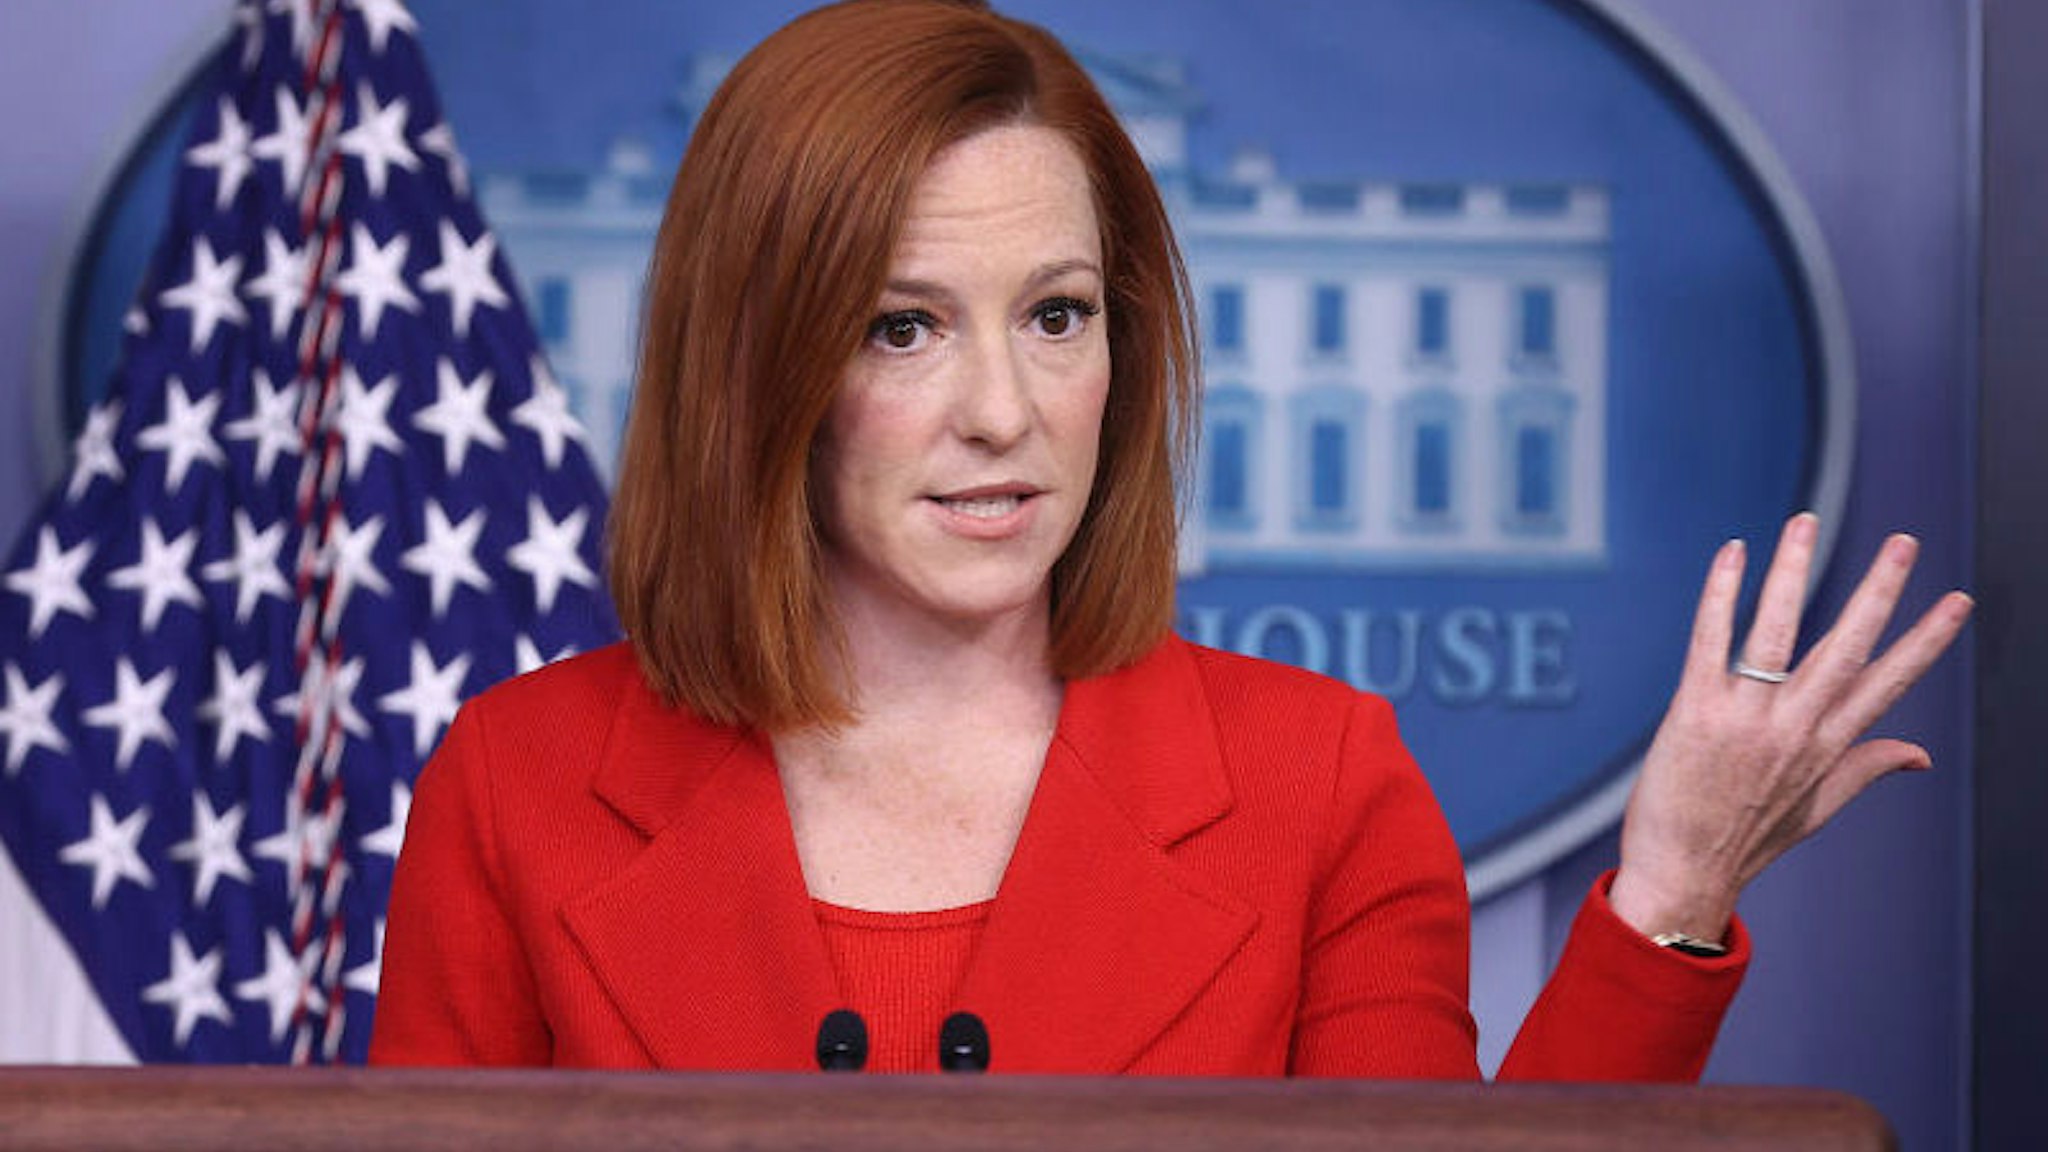 White House Press Secretary Jen Psaki talks to reporters during the daily news conference in the Brady Press Briefing Room at the White House on April 12, 2021 in Washington, DC.